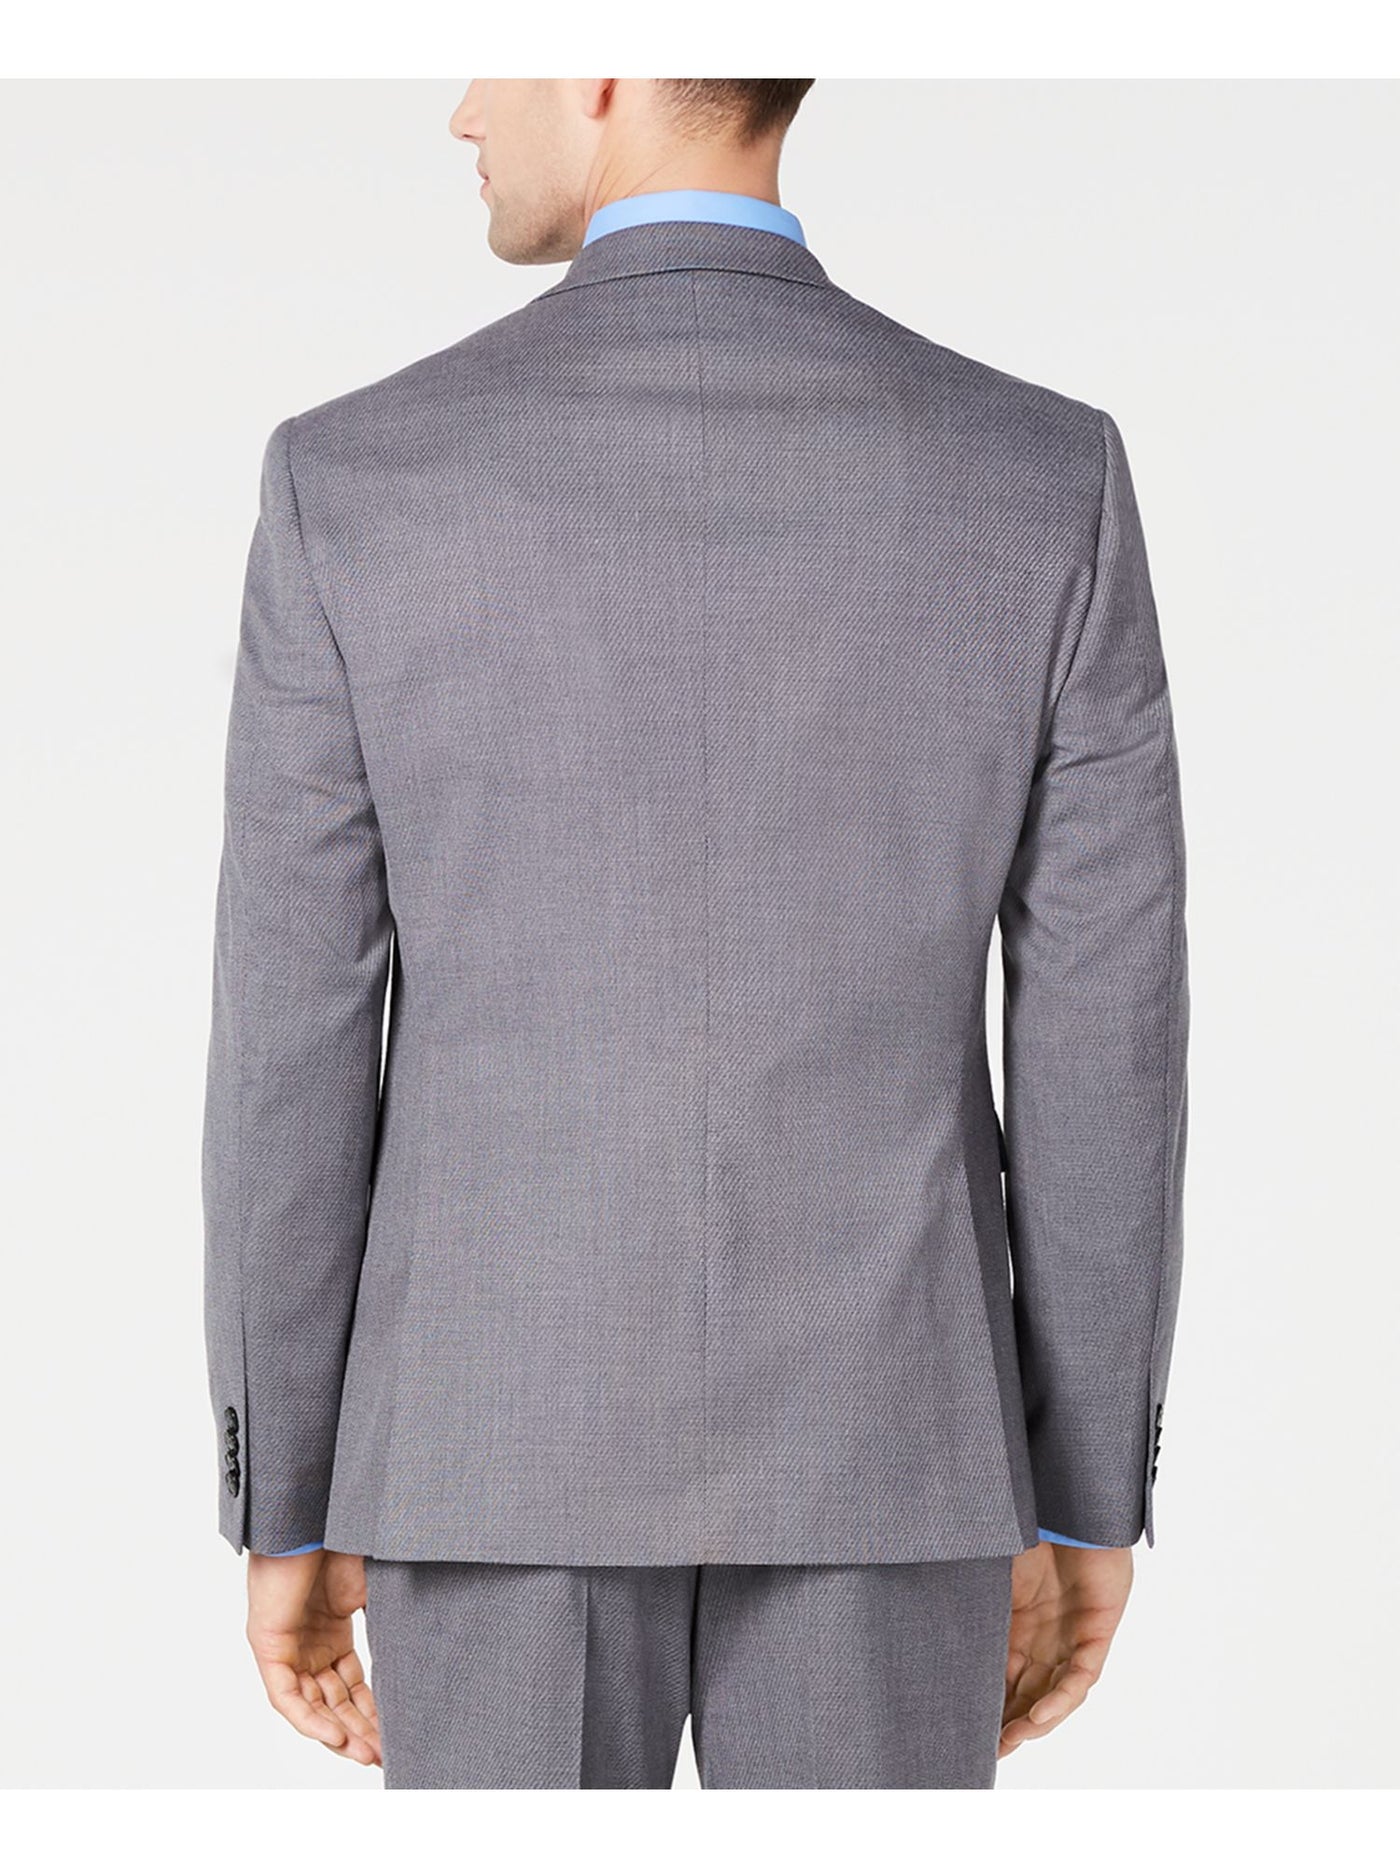 VINCE CAMUTO Mens Gray Single Breasted, Stretch, Slim Fit Wrinkle Resistant Suit Separate Blazer Jacket 46L